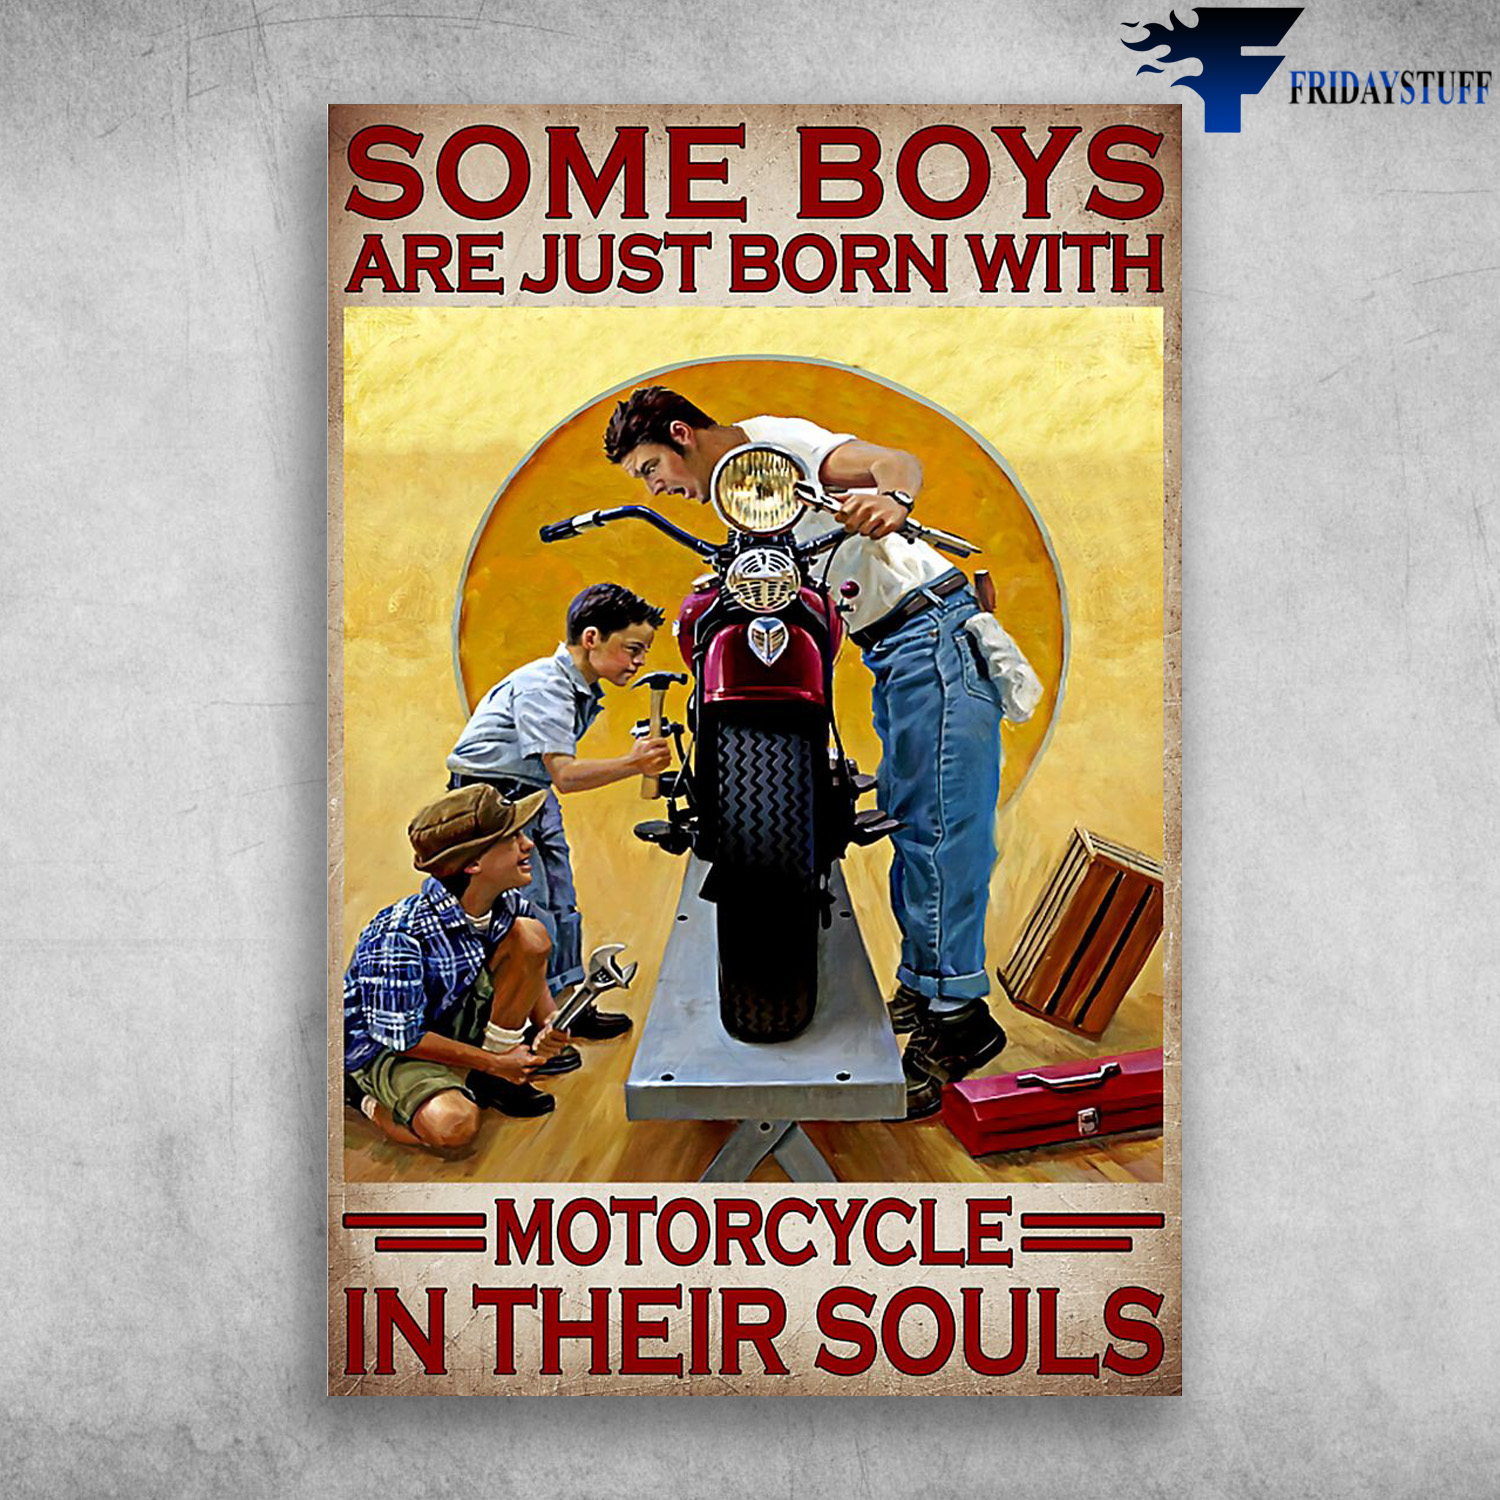 Dad And Children Love Motorcycle - Some Boys Are Just Born With Motorcycle In Their Souls